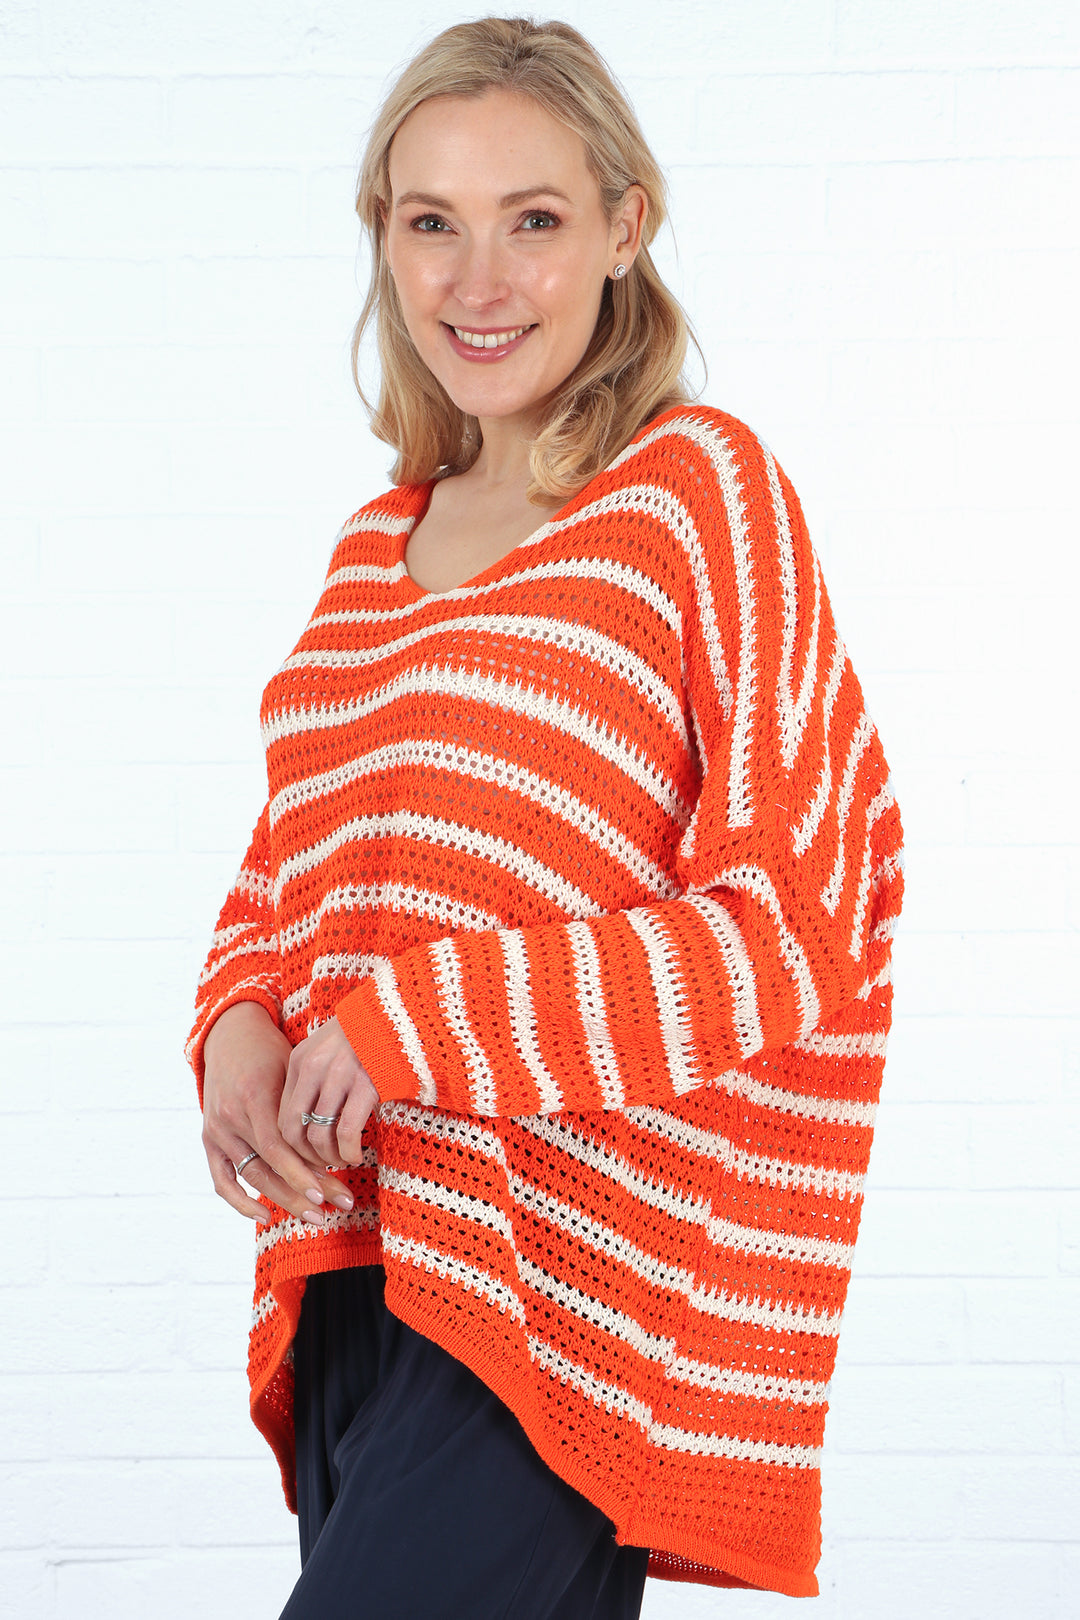 model wearing an orange and cream striped open knit cotton jumper, the jumper has a dip hem and long sleeves